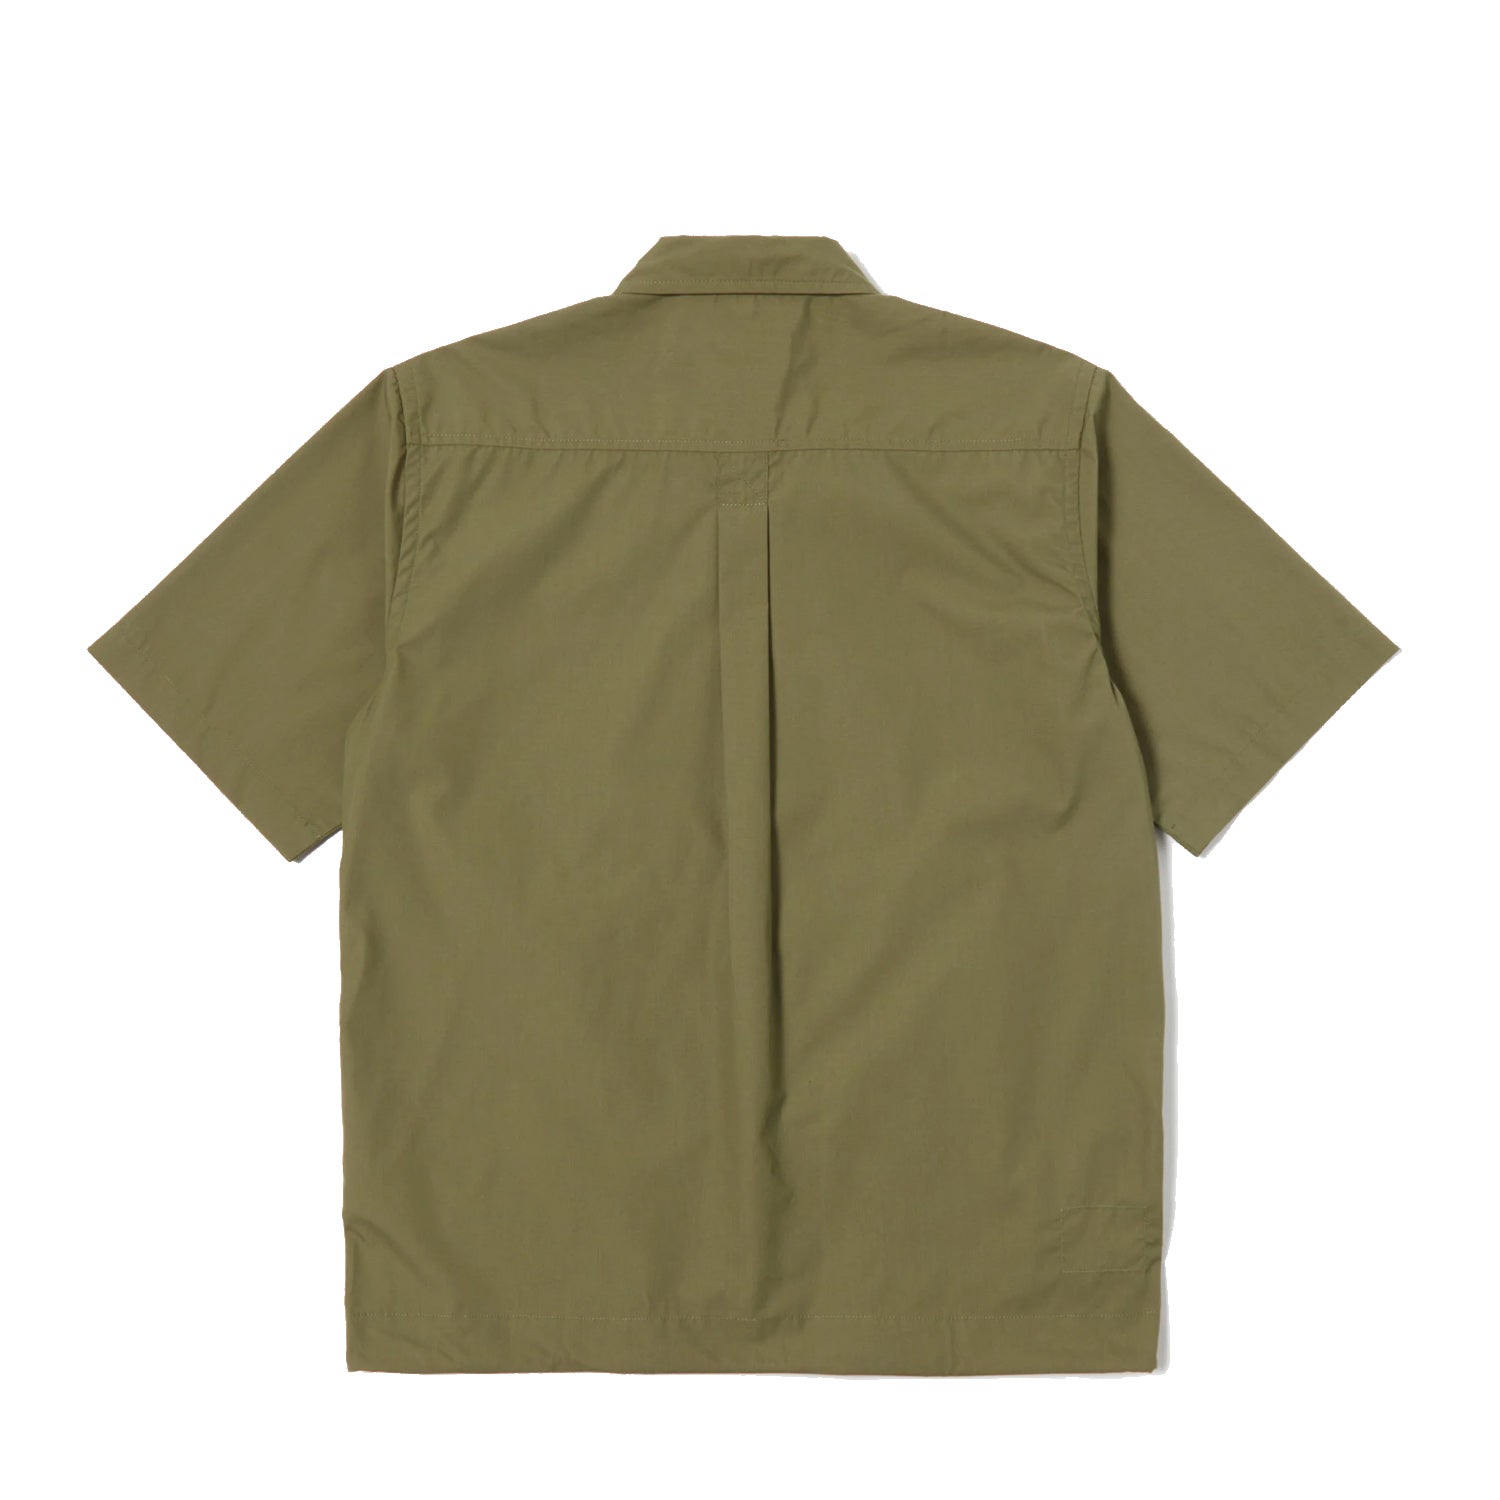 Overshirt - Recycled Poly Tech